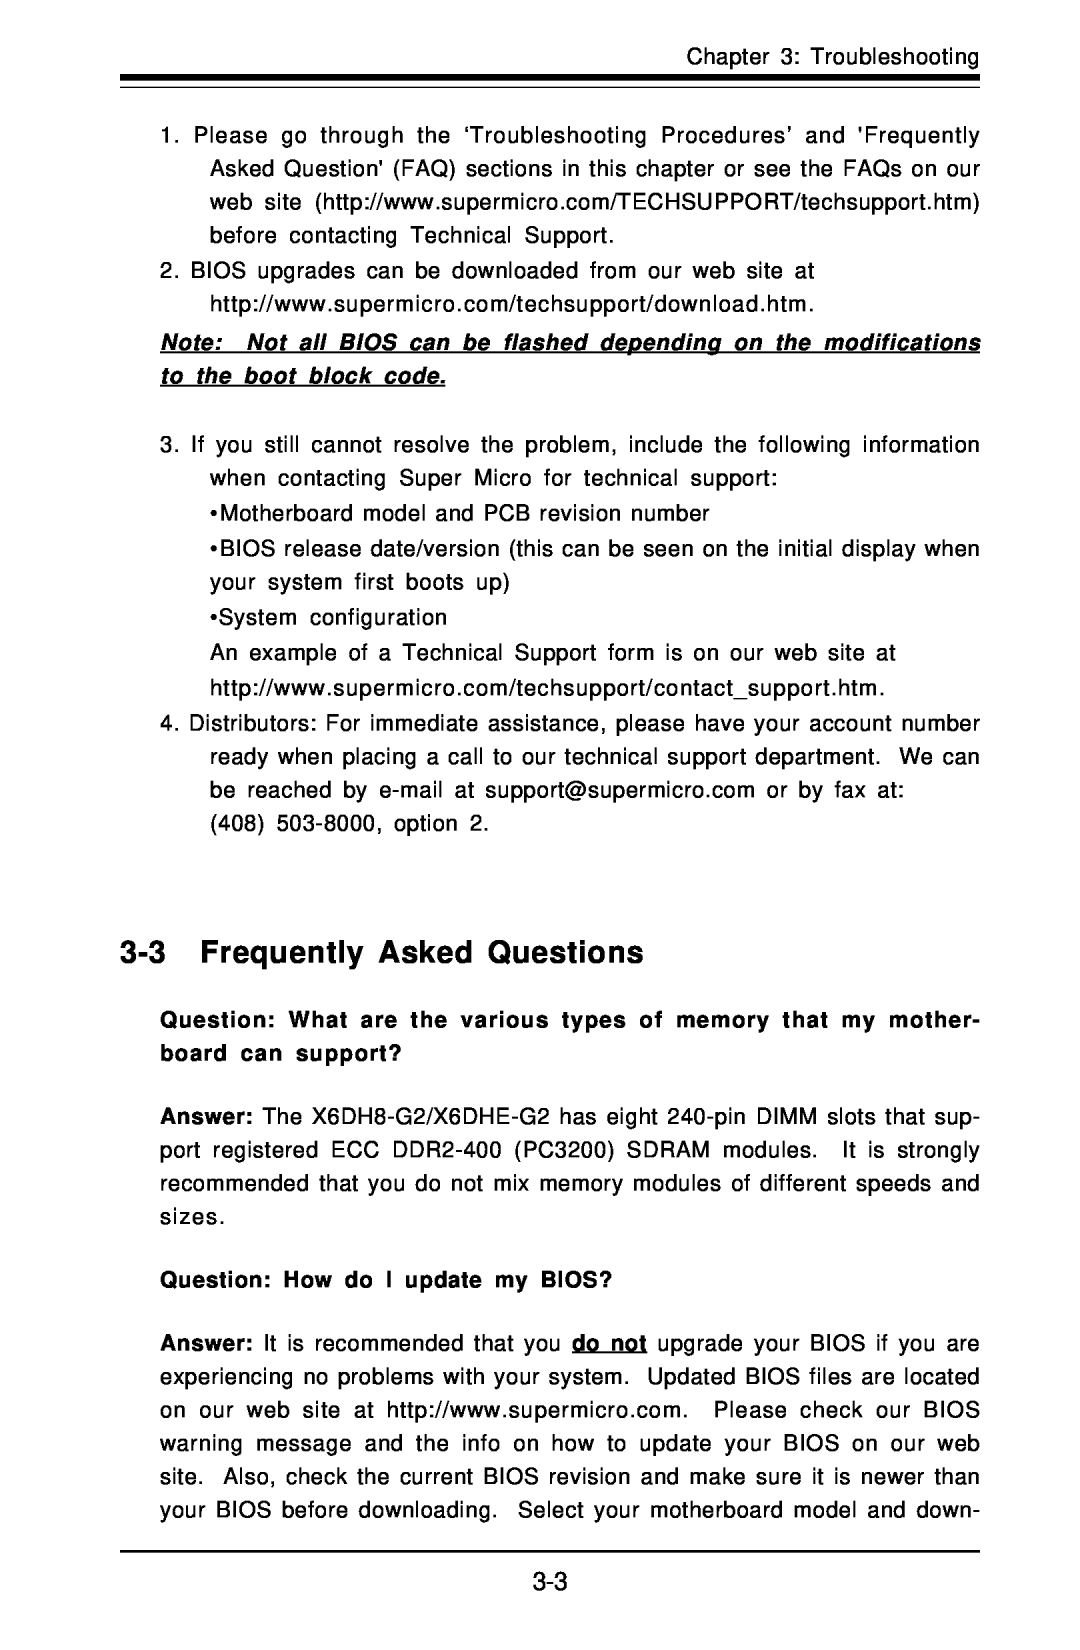 SUPER MICRO Computer X6DHE-G2 Frequently Asked Questions, Note Not all BIOS can be flashed depending on the modifications 